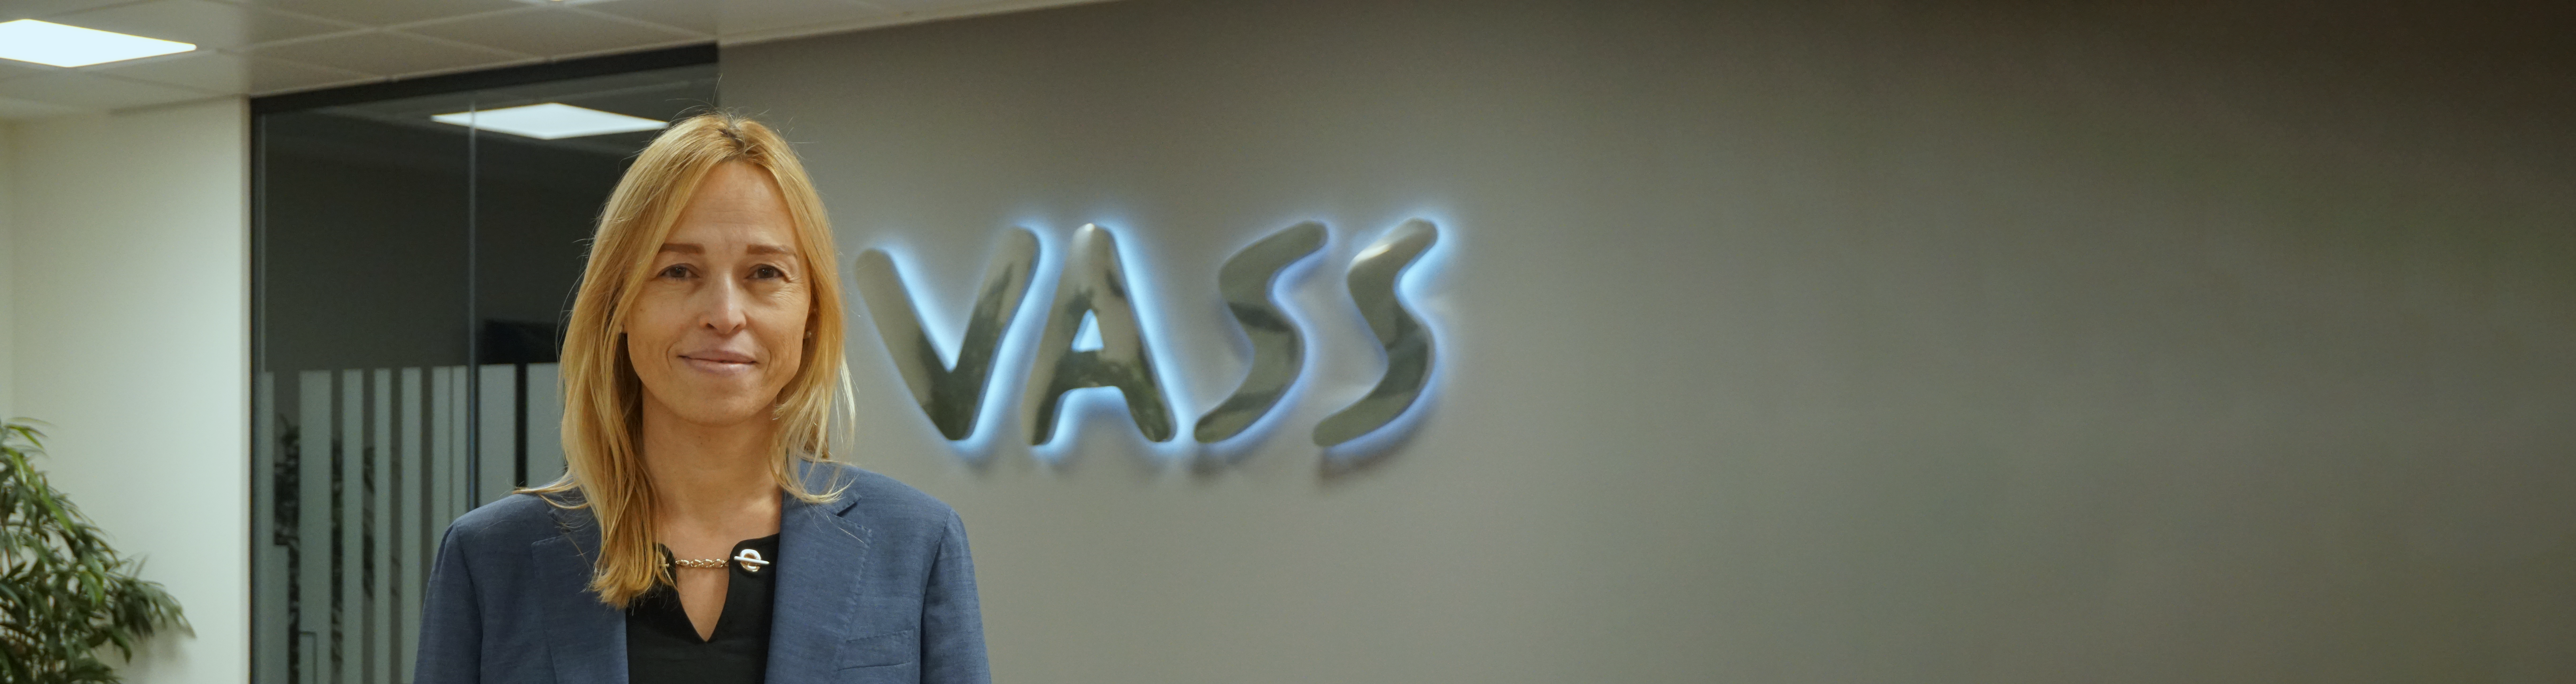 Sonia Torres, new Global Head of Insurance at VASS